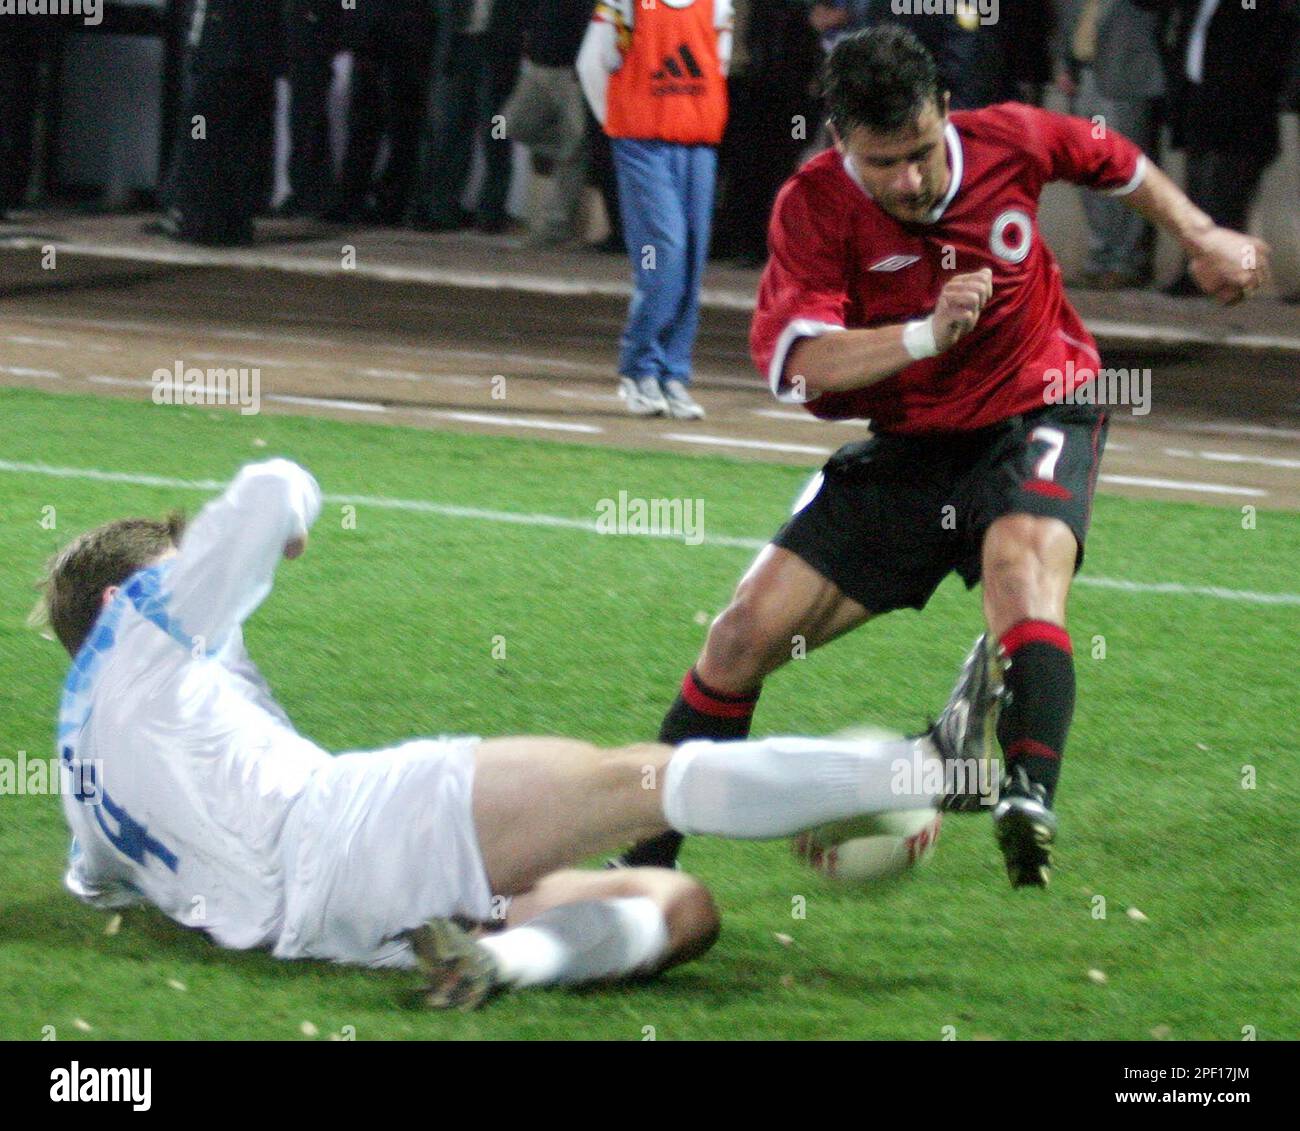 Albania's Edvin Murati, right, fights for the ball with Iceland's Bjarni  Gudjonsson during their friendly international soccer match in Tirana,  Albania, Wednesday March 31, 2004. Albania beat Iceland 2-1. (AP  Photo/Hektor Pustina